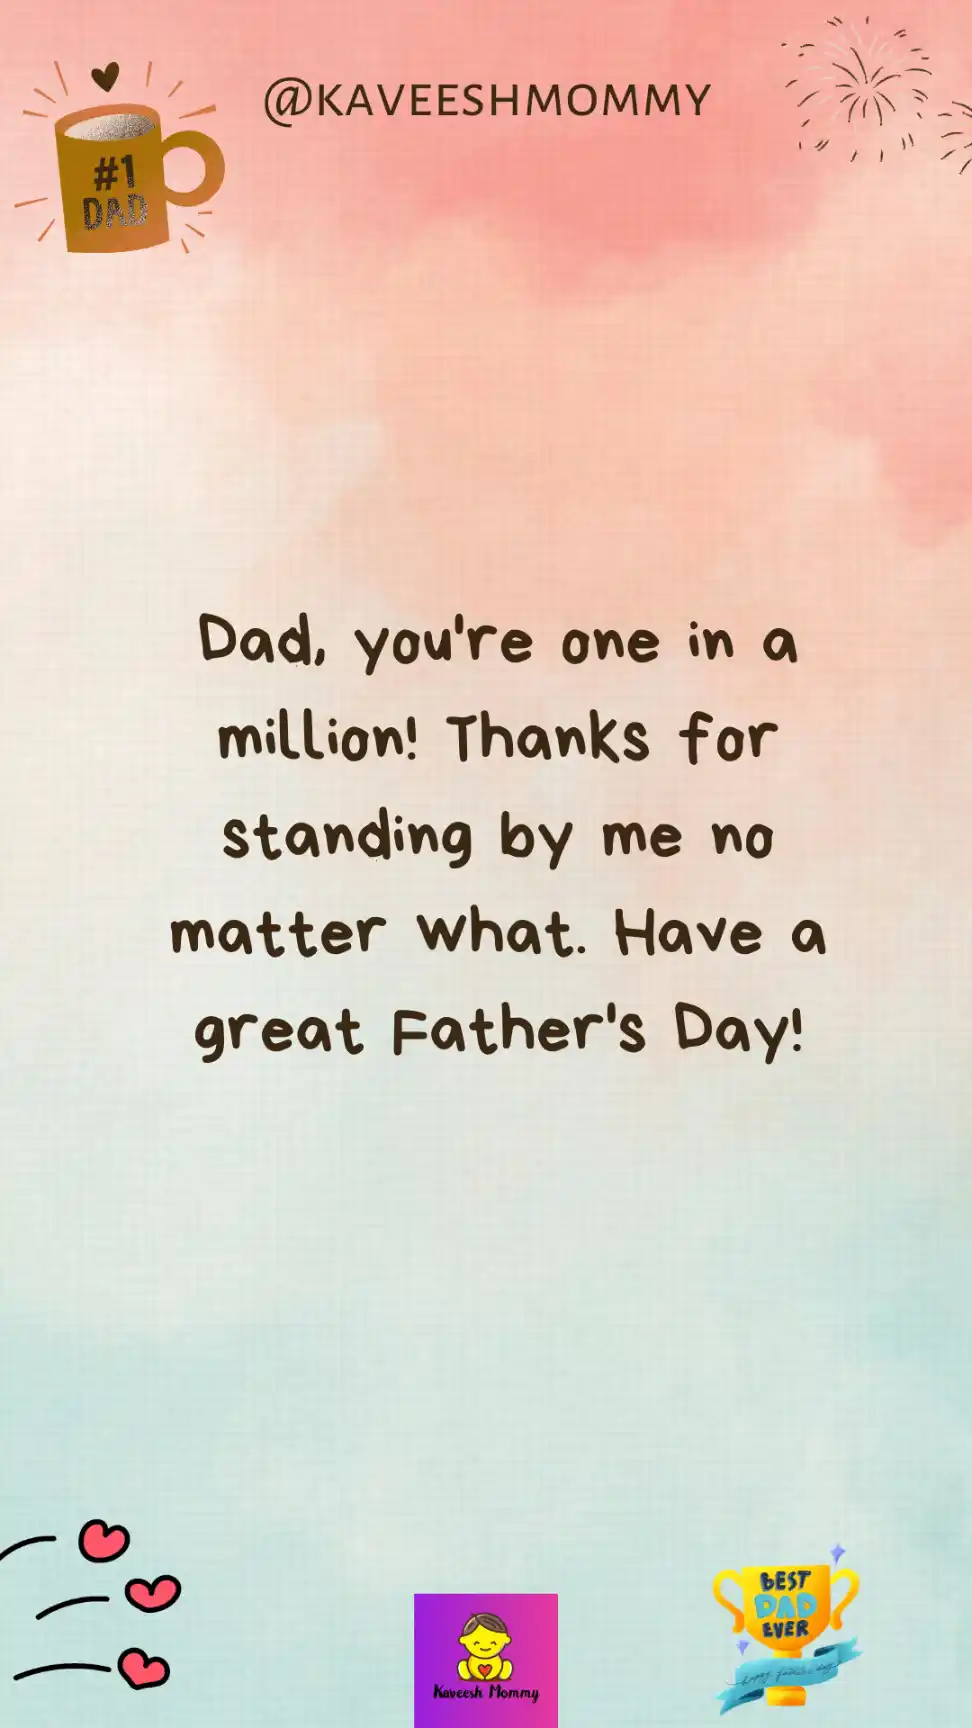 happy father's day image's-Dad, you're one in a million! Thanks for standing by me no matter what. Have a great Father's Day!